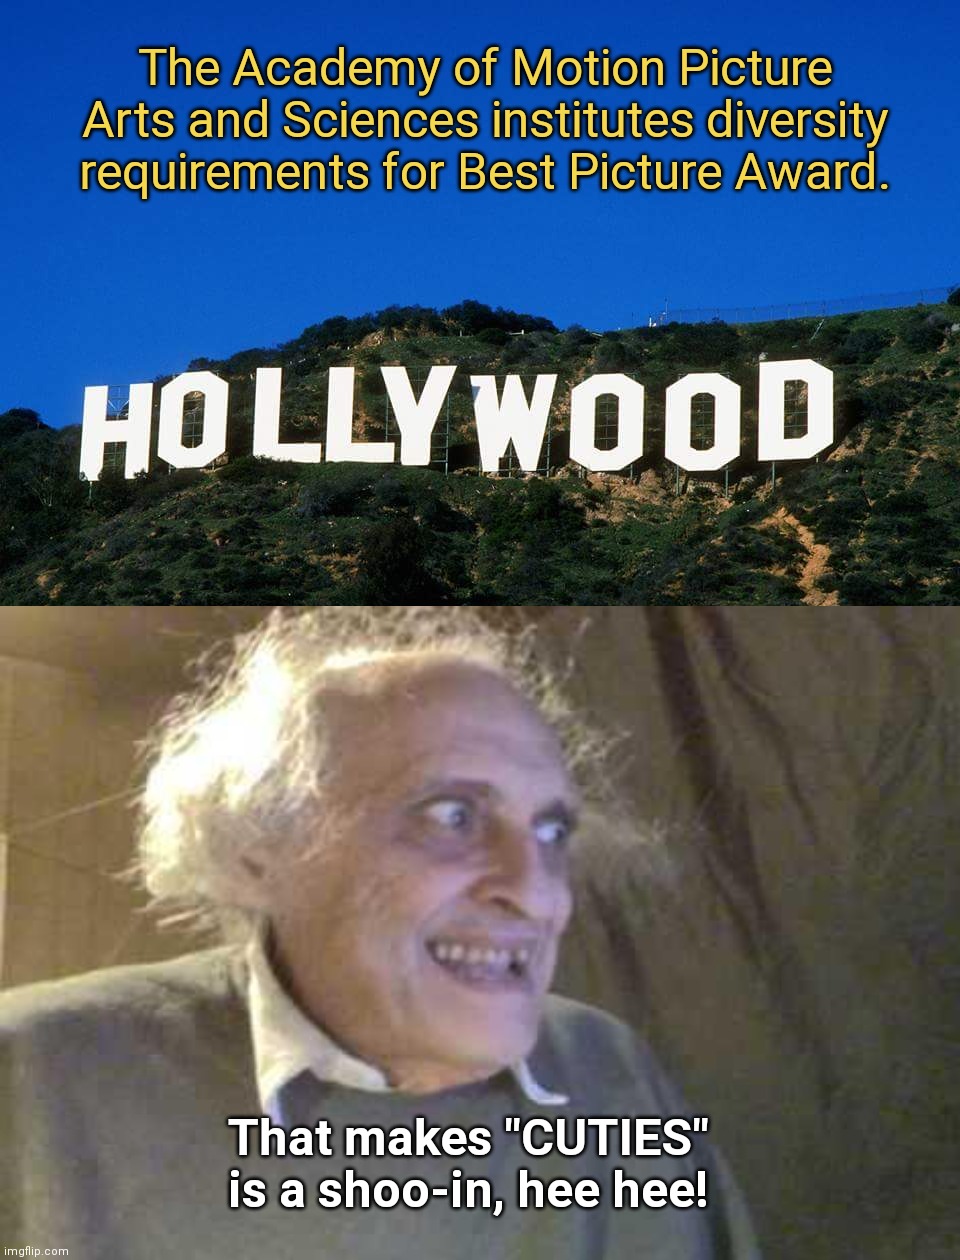 While Hollywood institutes diversity in art standards, Netflix tosses out decency standards | The Academy of Motion Picture Arts and Sciences institutes diversity requirements for Best Picture Award. That makes "CUTIES" is a shoo-in, hee hee! | image tagged in scumbag hollywood,netflix,cuties movie,pedophiles,thats just sick | made w/ Imgflip meme maker